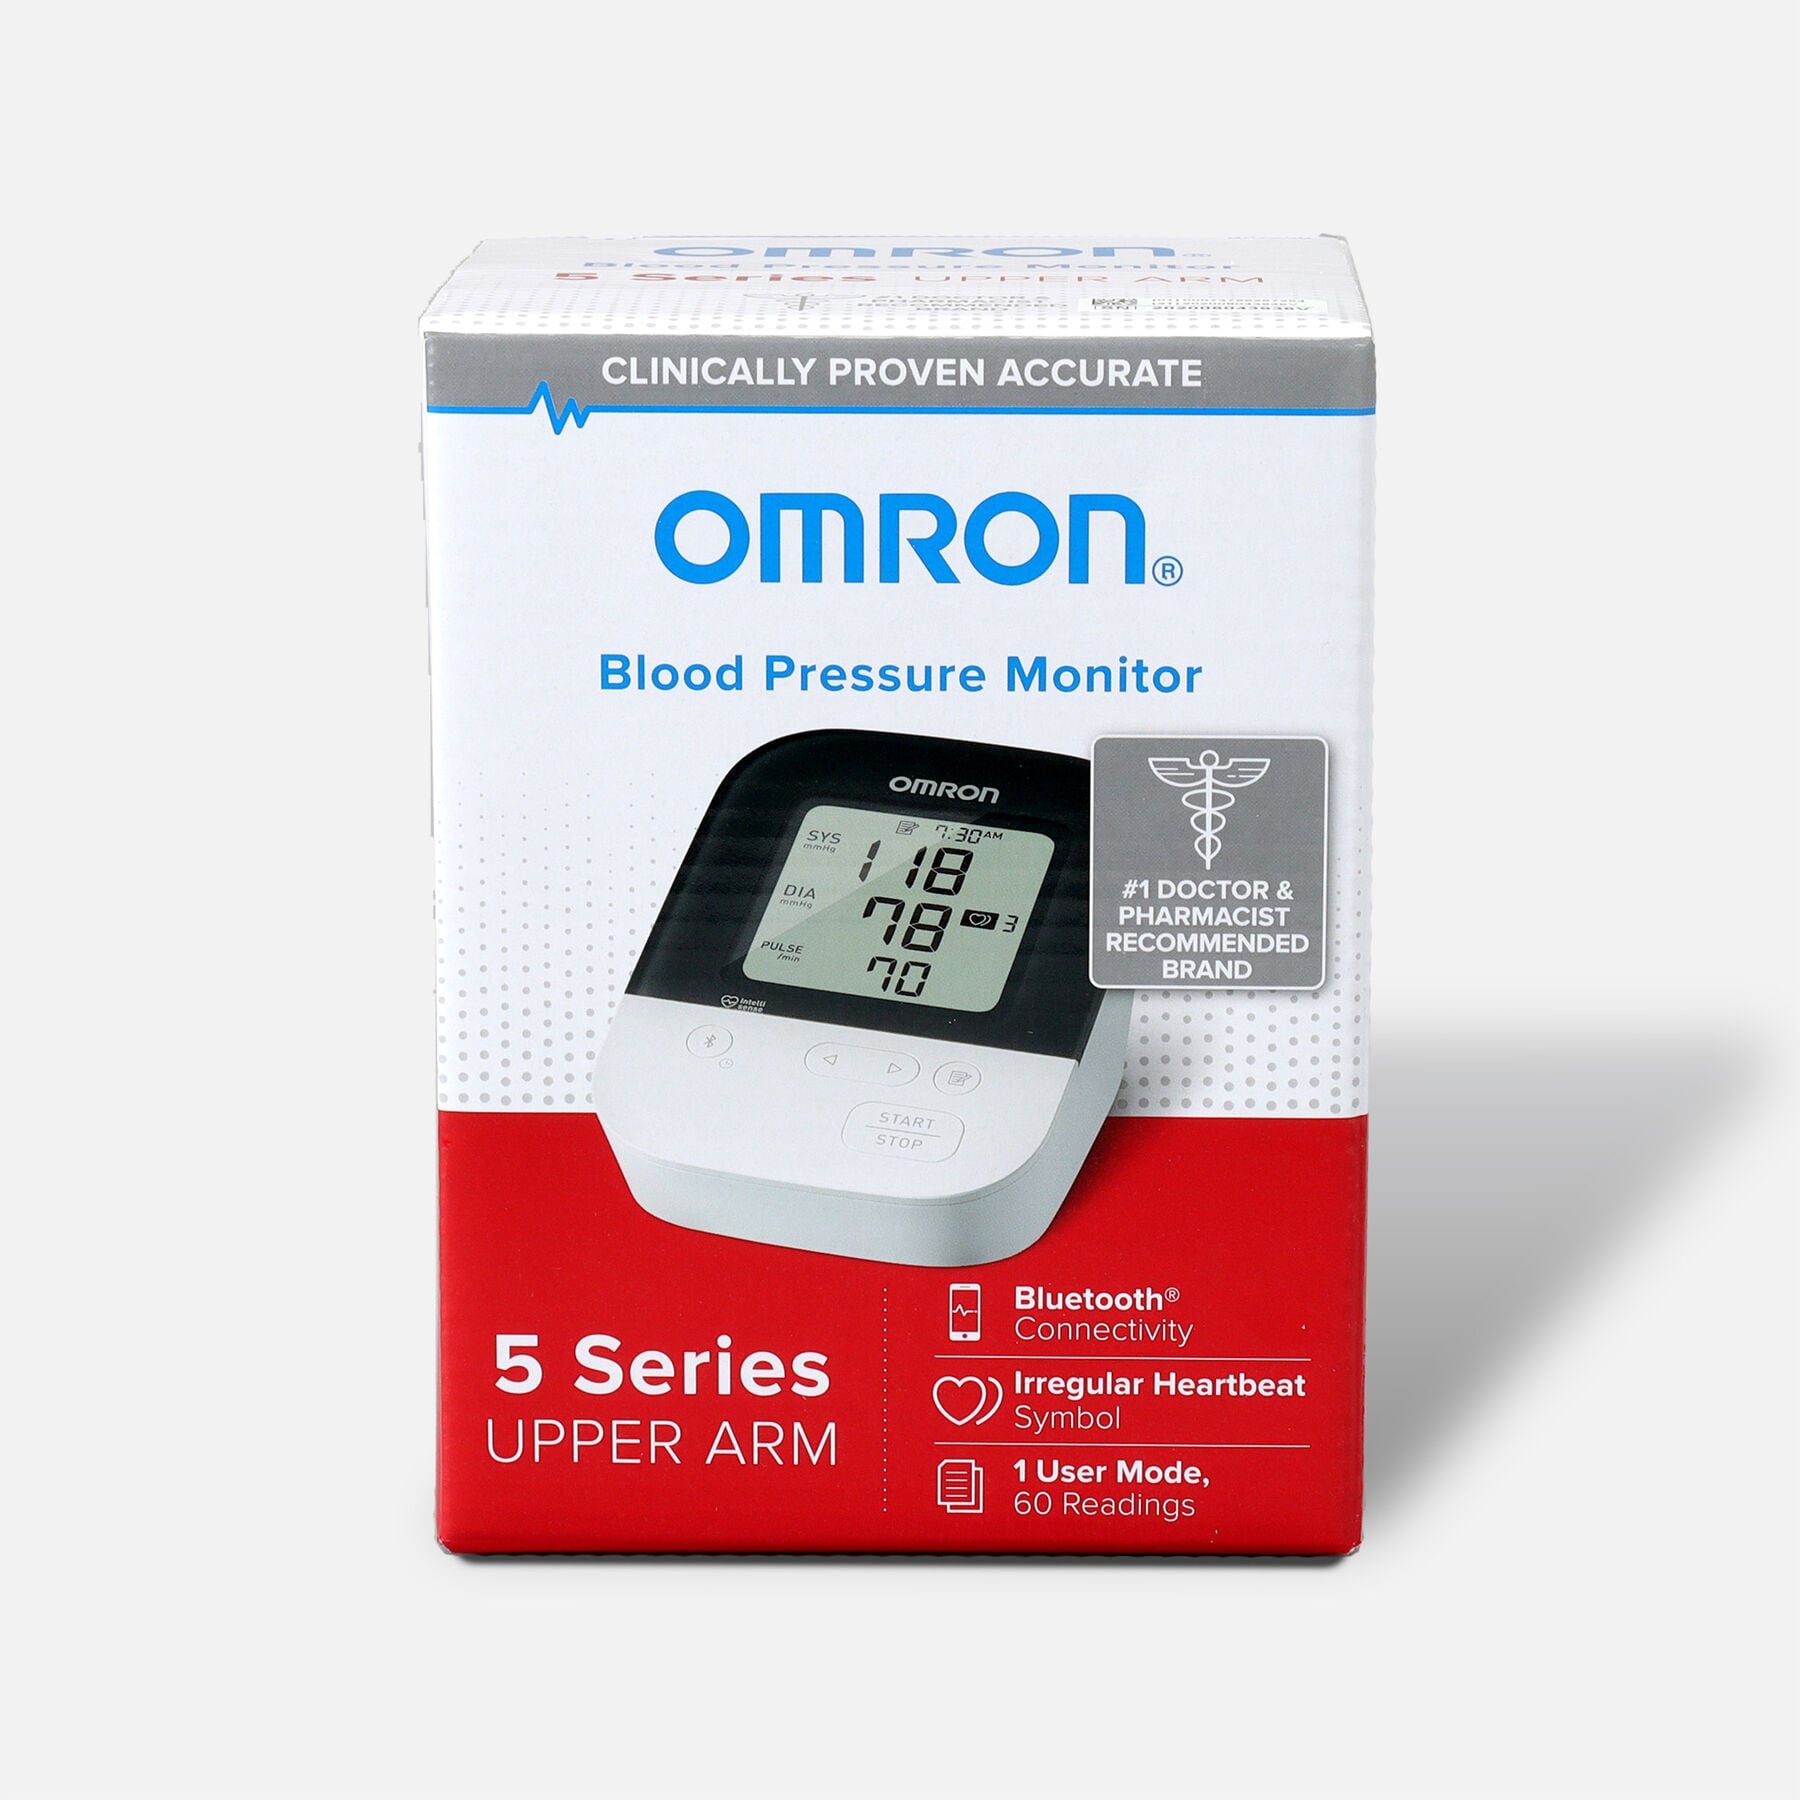 https://fsastore.com/on/demandware.static/-/Sites-hec-master/default/dw9dc2567f/images/large/omron-5-series-wireless-upper-arm-blood-pressure-monitor-bp7250-one-user-60-reading-memory-soft-wide-range-cuff-1-dr-recommended-27925-1.jpeg